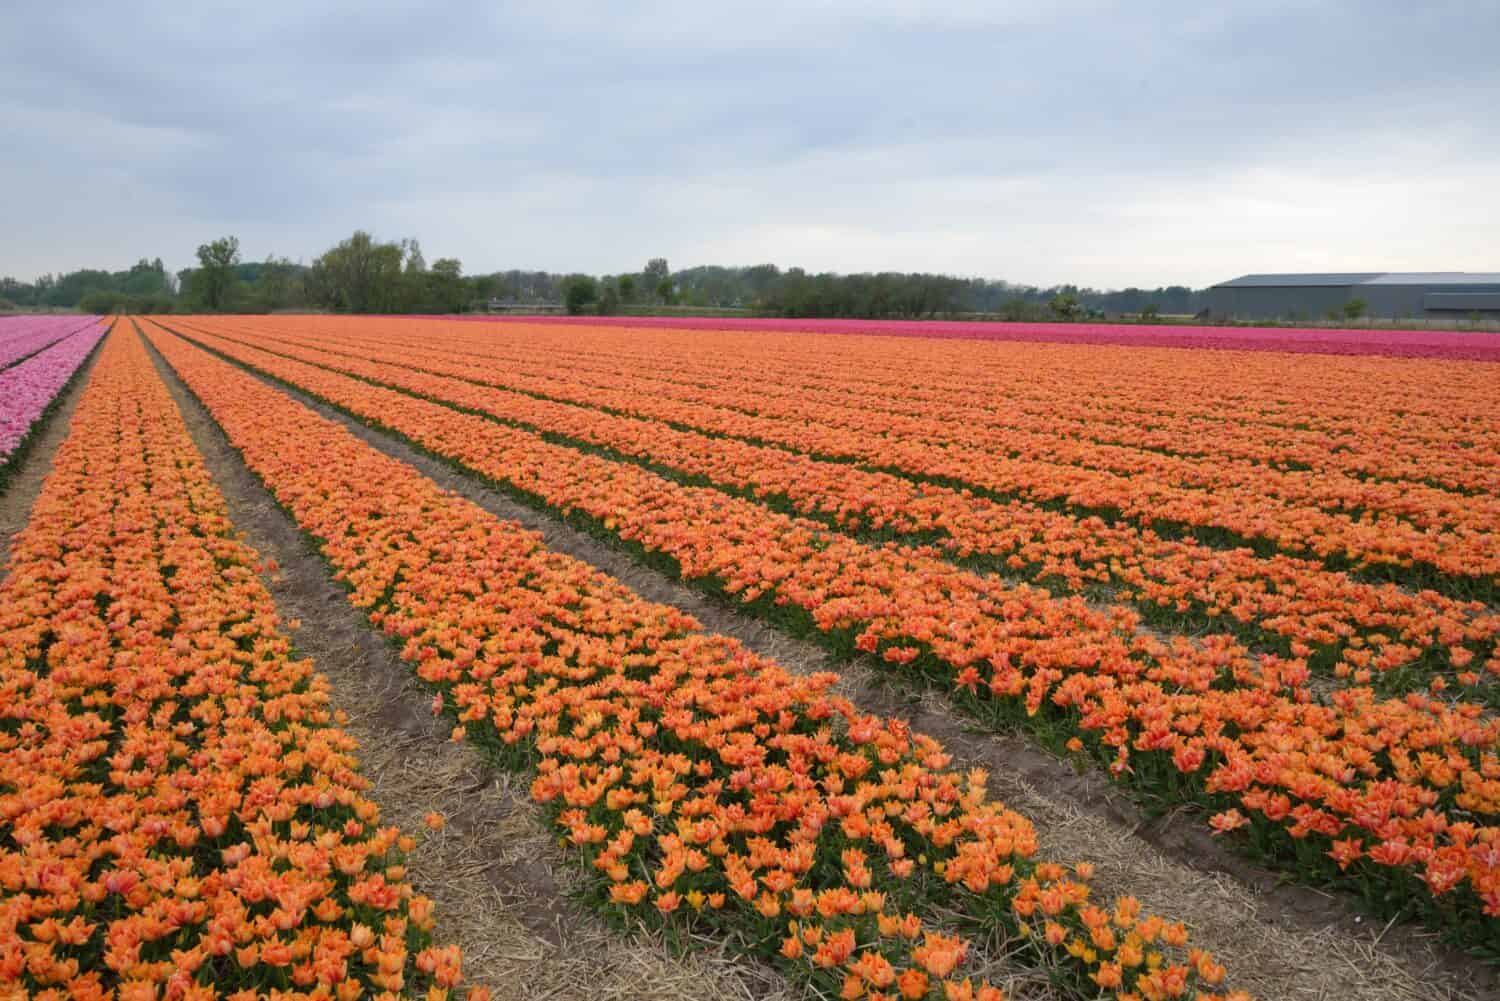 Tulipa 'Willem van Oranje' is a tulip of the double early group (Div. 2) with orange flowers, tulip field in Holland